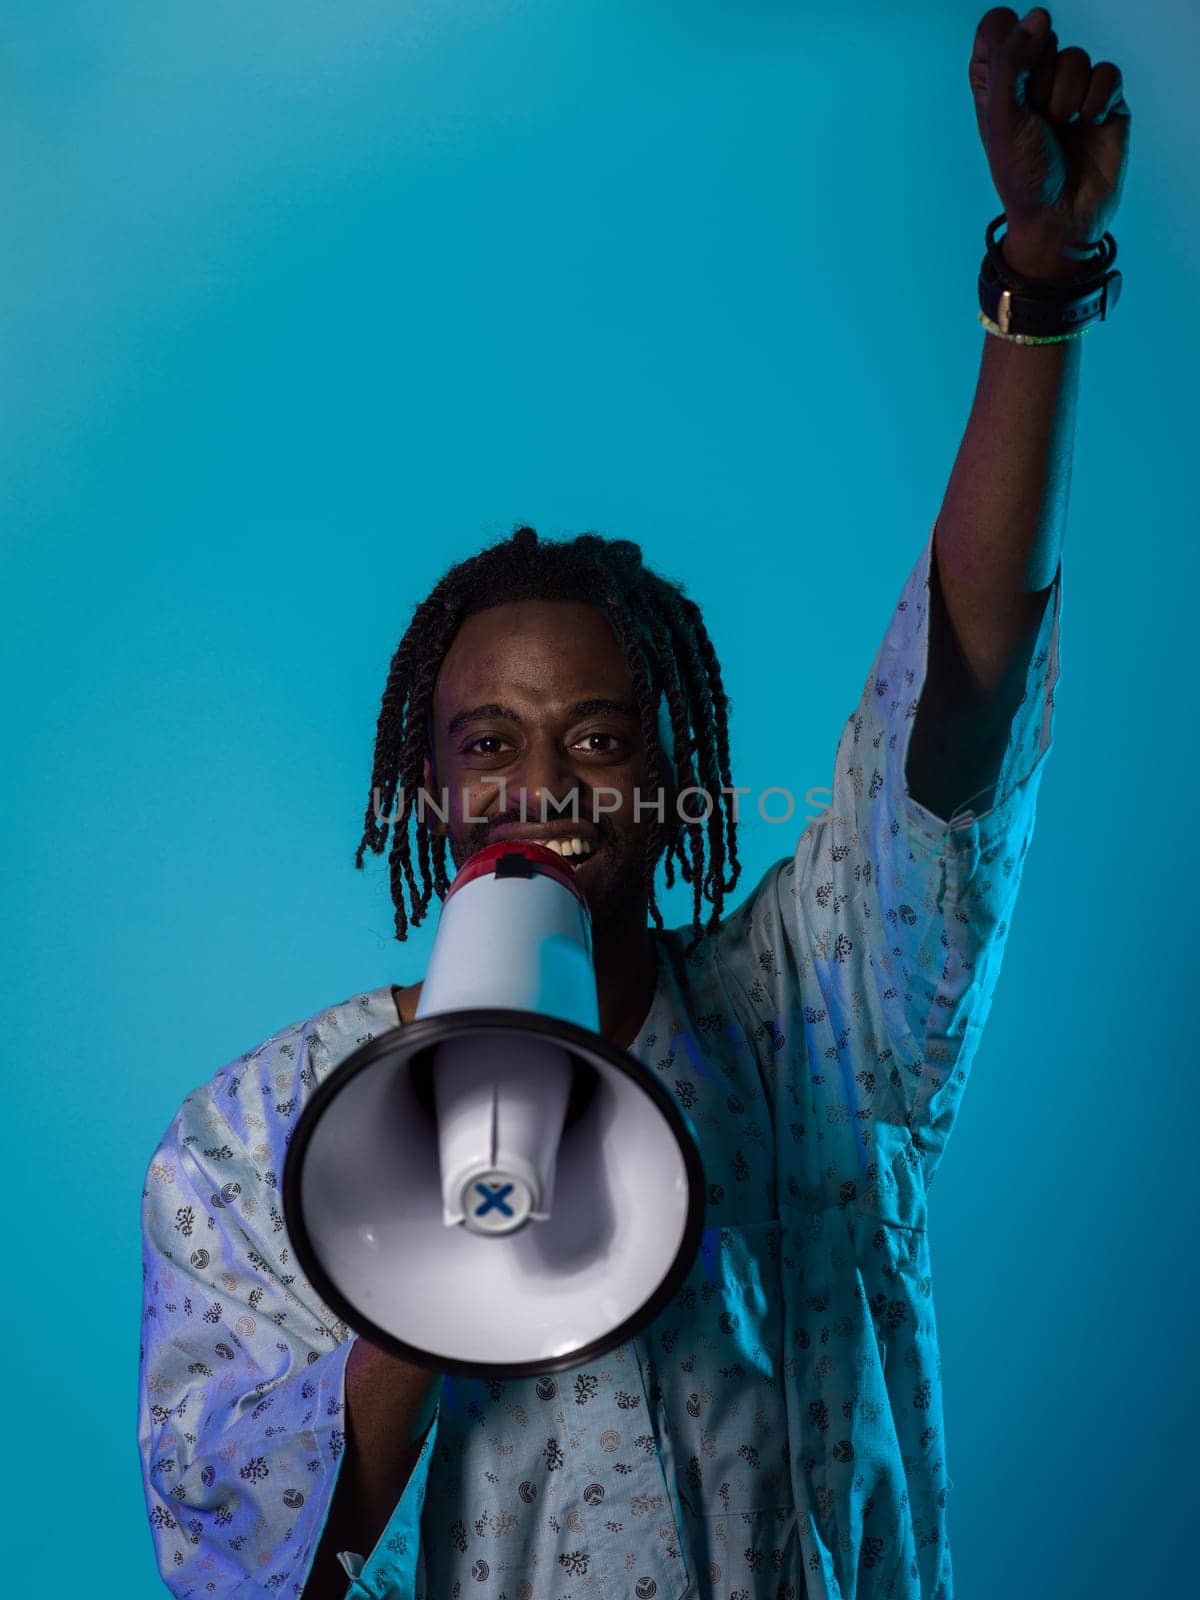 In a powerful and symbolic image, an African American man wears traditional clothing, passionately wields a megaphone against a striking blue background, with his hand raised in the air symbolizing his vocal and cultural empowerment in the pursuit of social justice and equality by dotshock